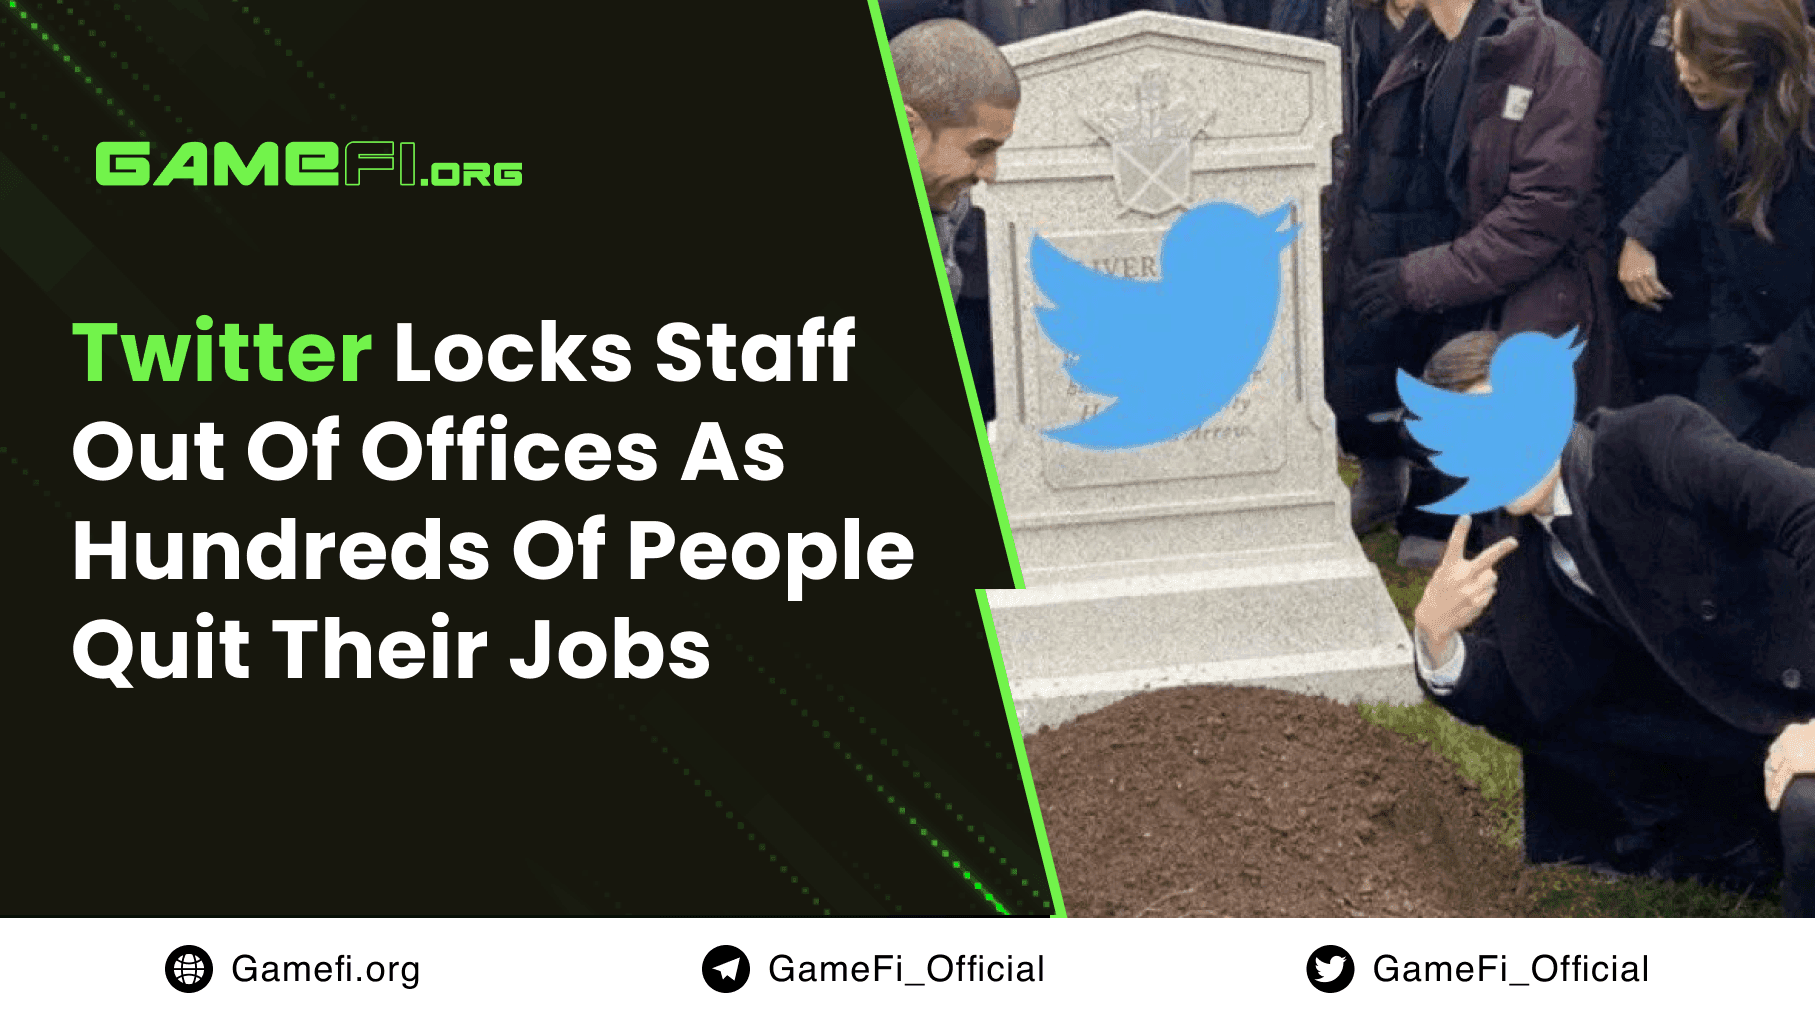 Twitter Locks Staff out of Offices as Hundreds of People Quit Their Jobs